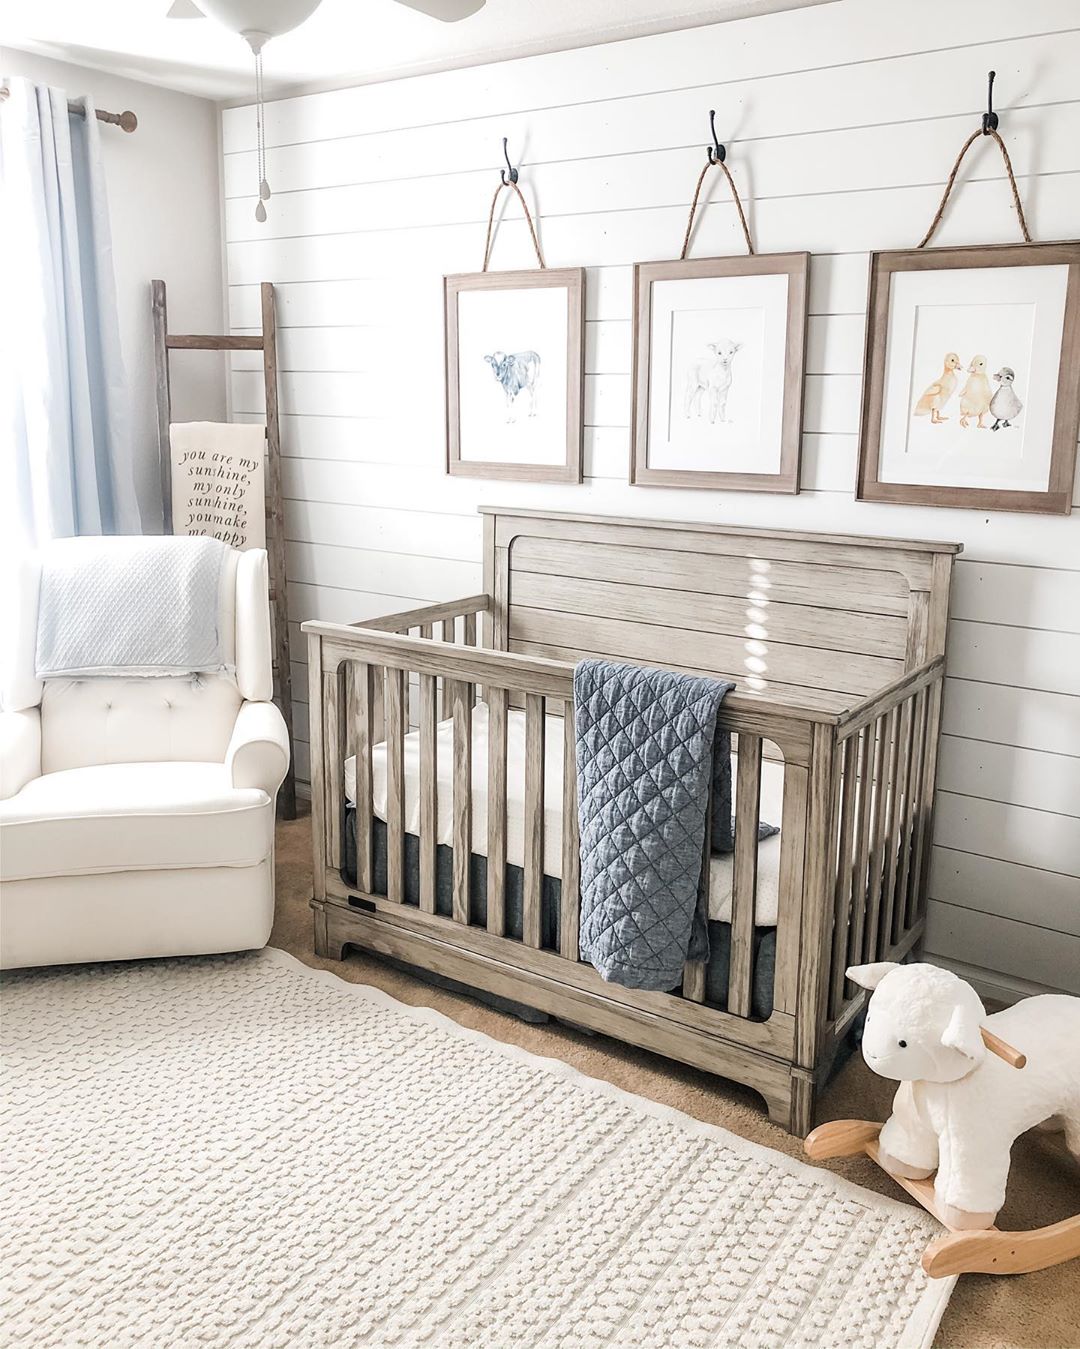 Farmhouse rustic-style baby room. Photo by Instagram user @ashley.l.thompson